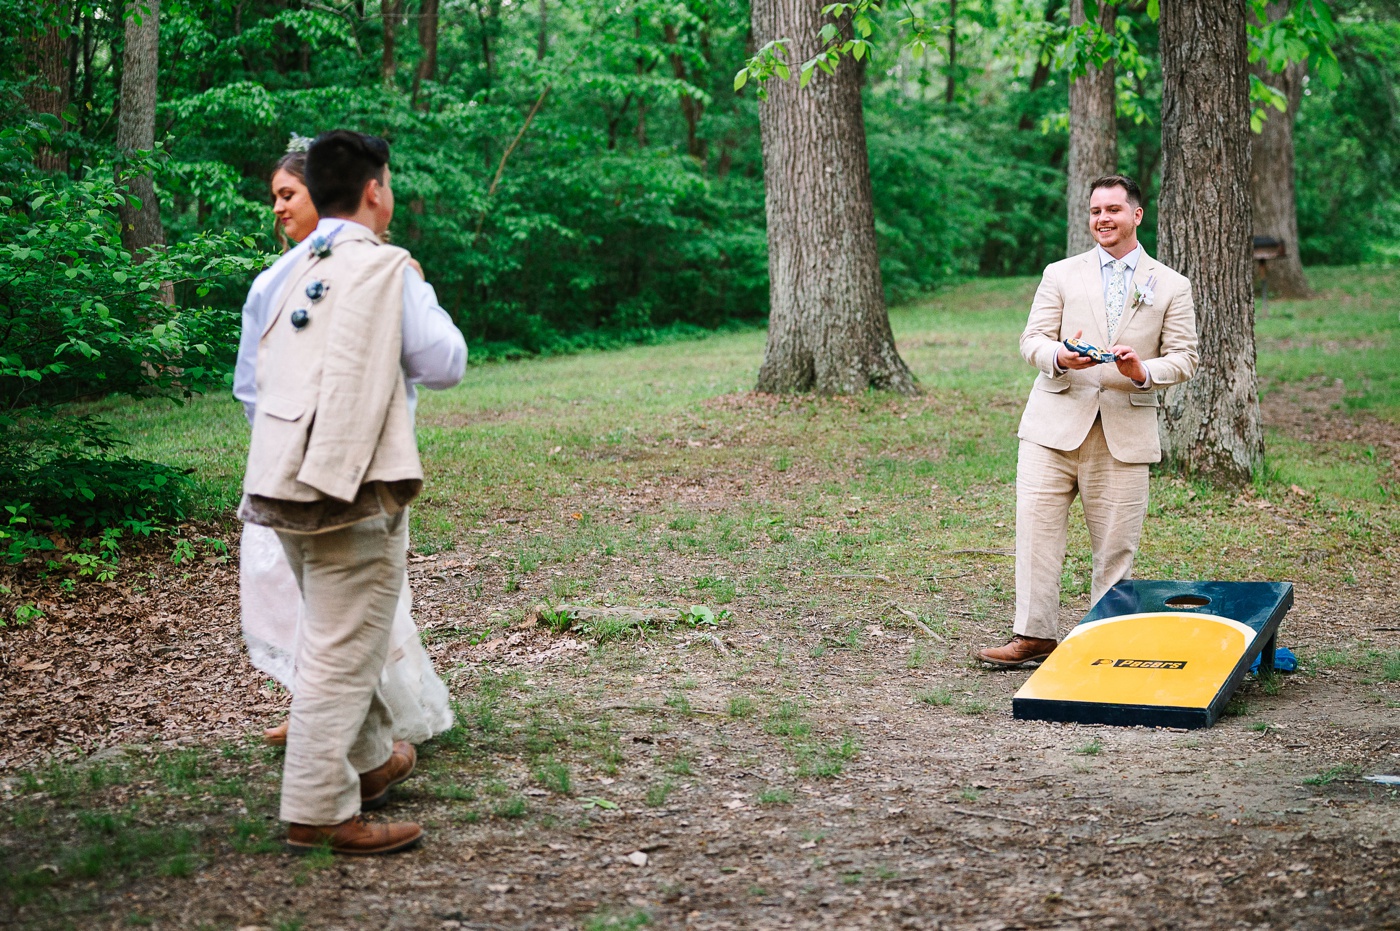 Groom playing cornhole at his outdoor wedding reception